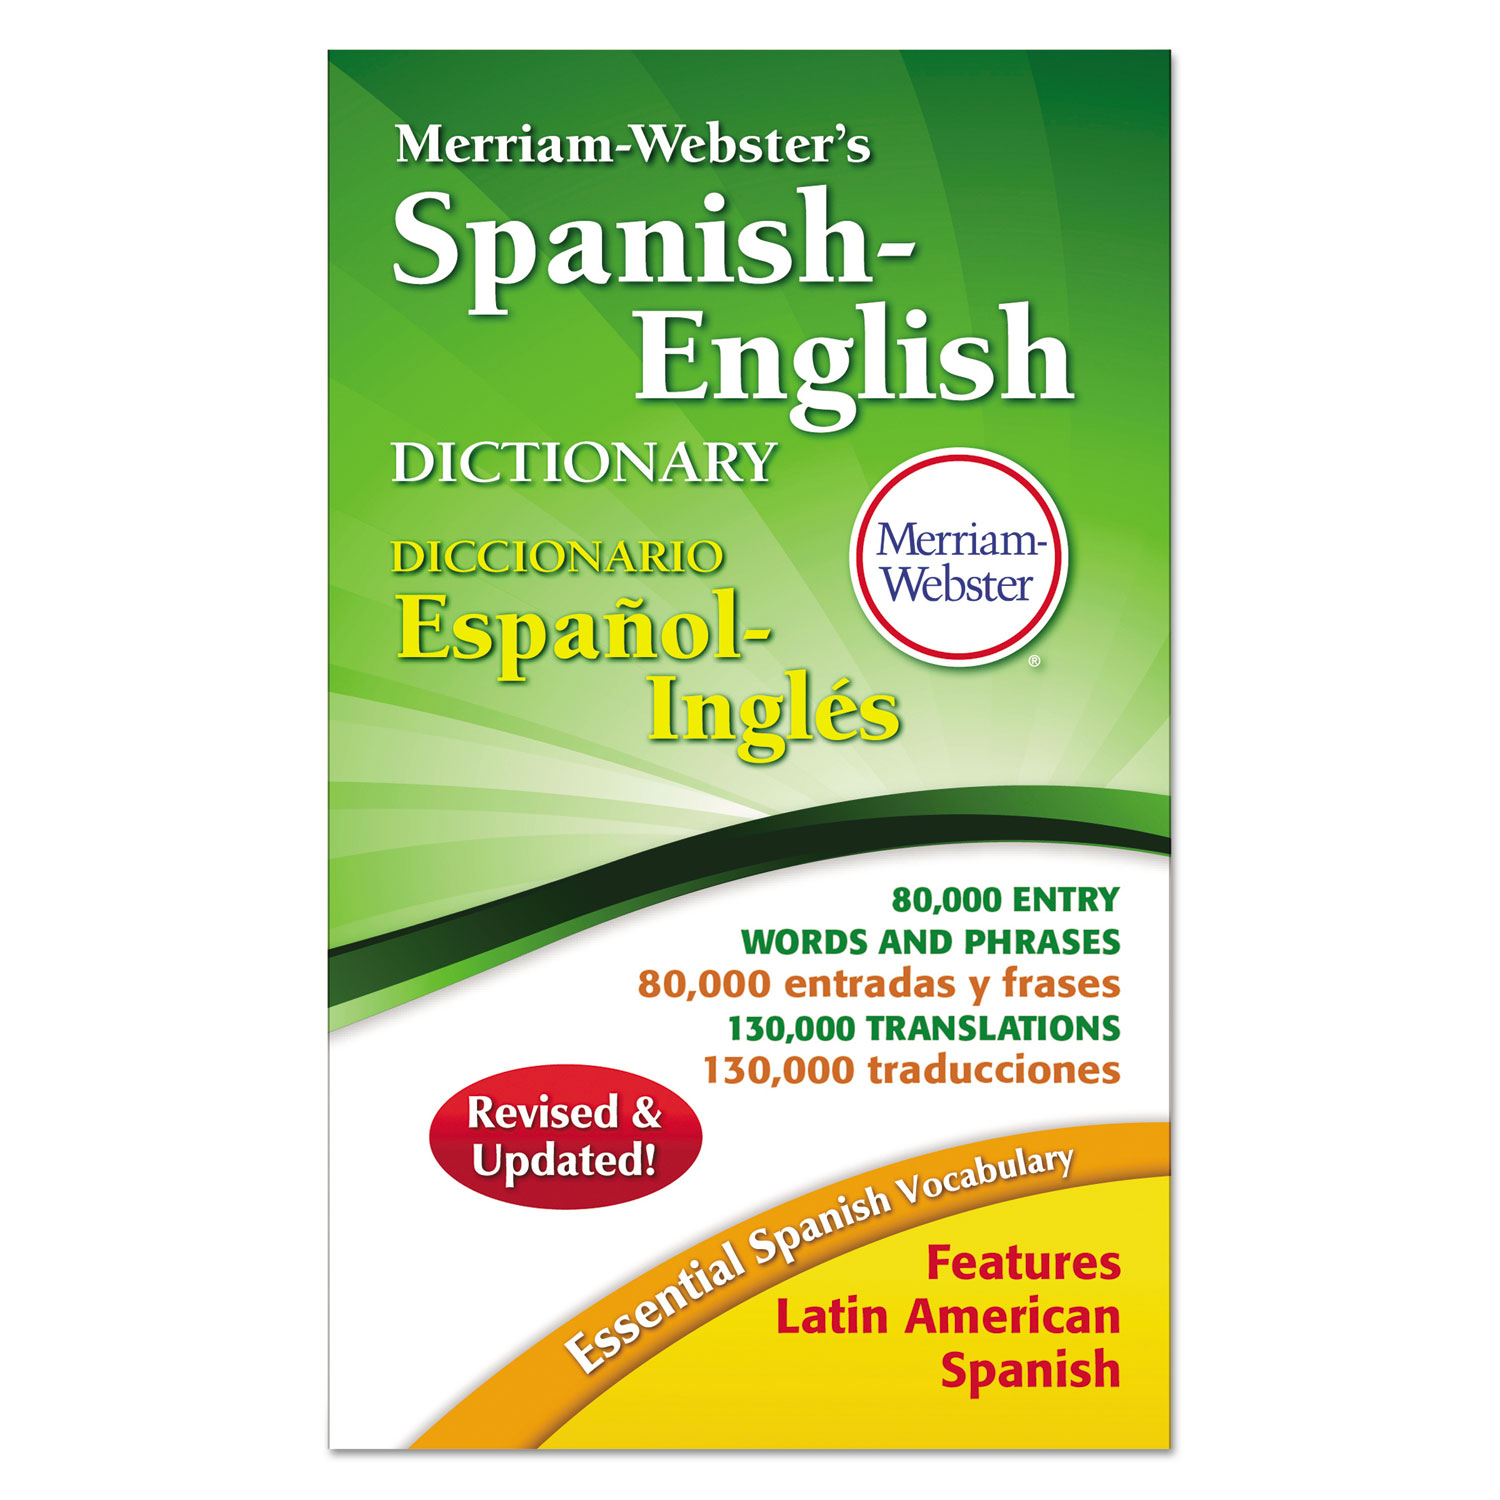 Merriam-Websters Spanish-English Dictionary, 864 Pages